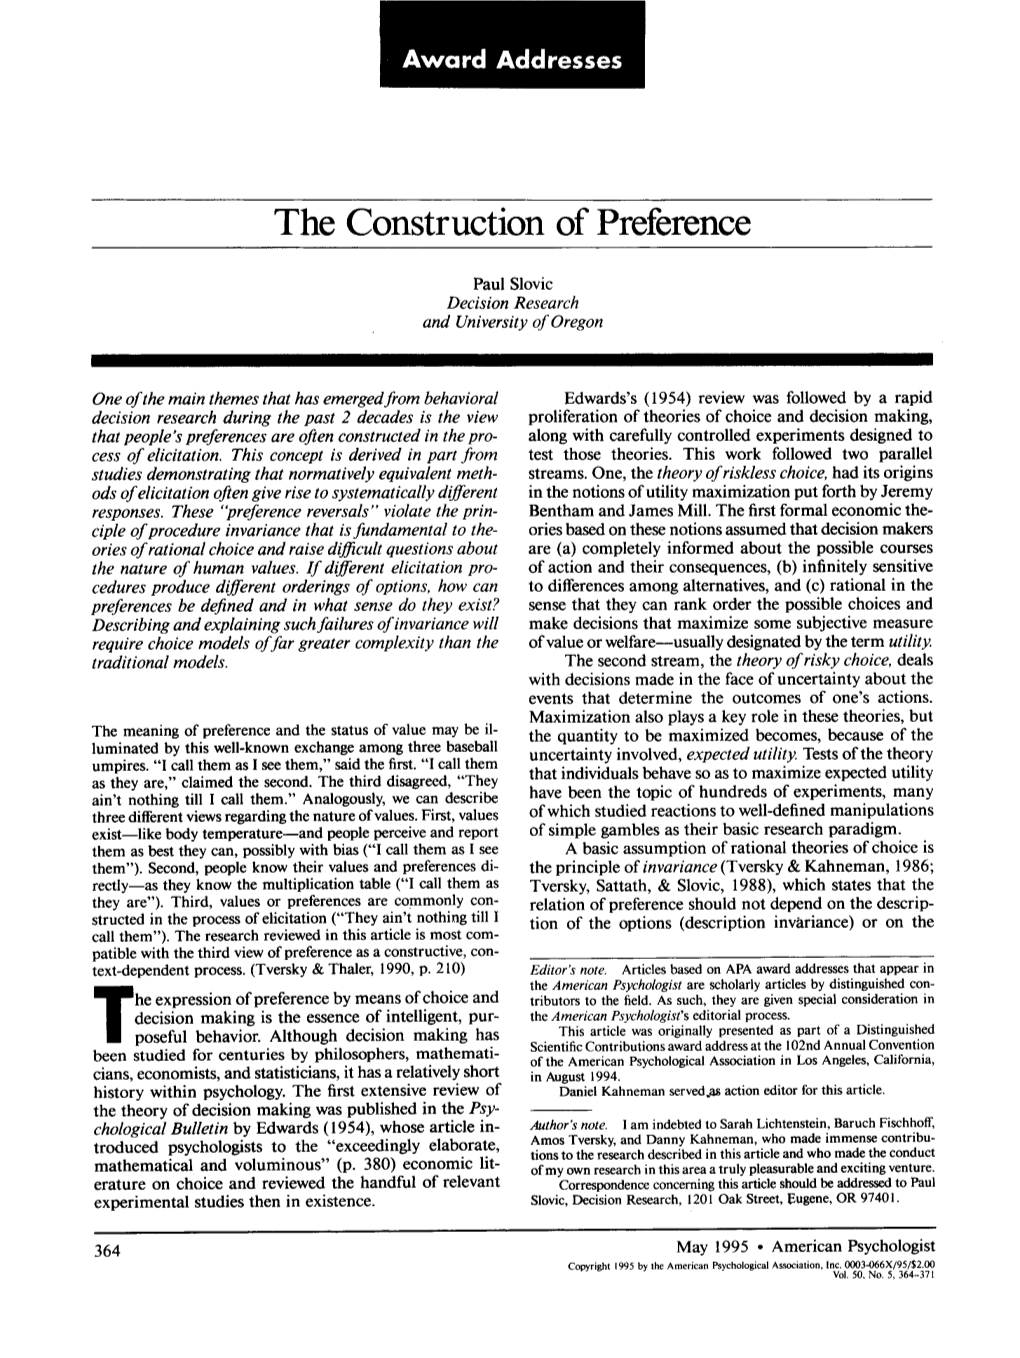 The Construction of Preference